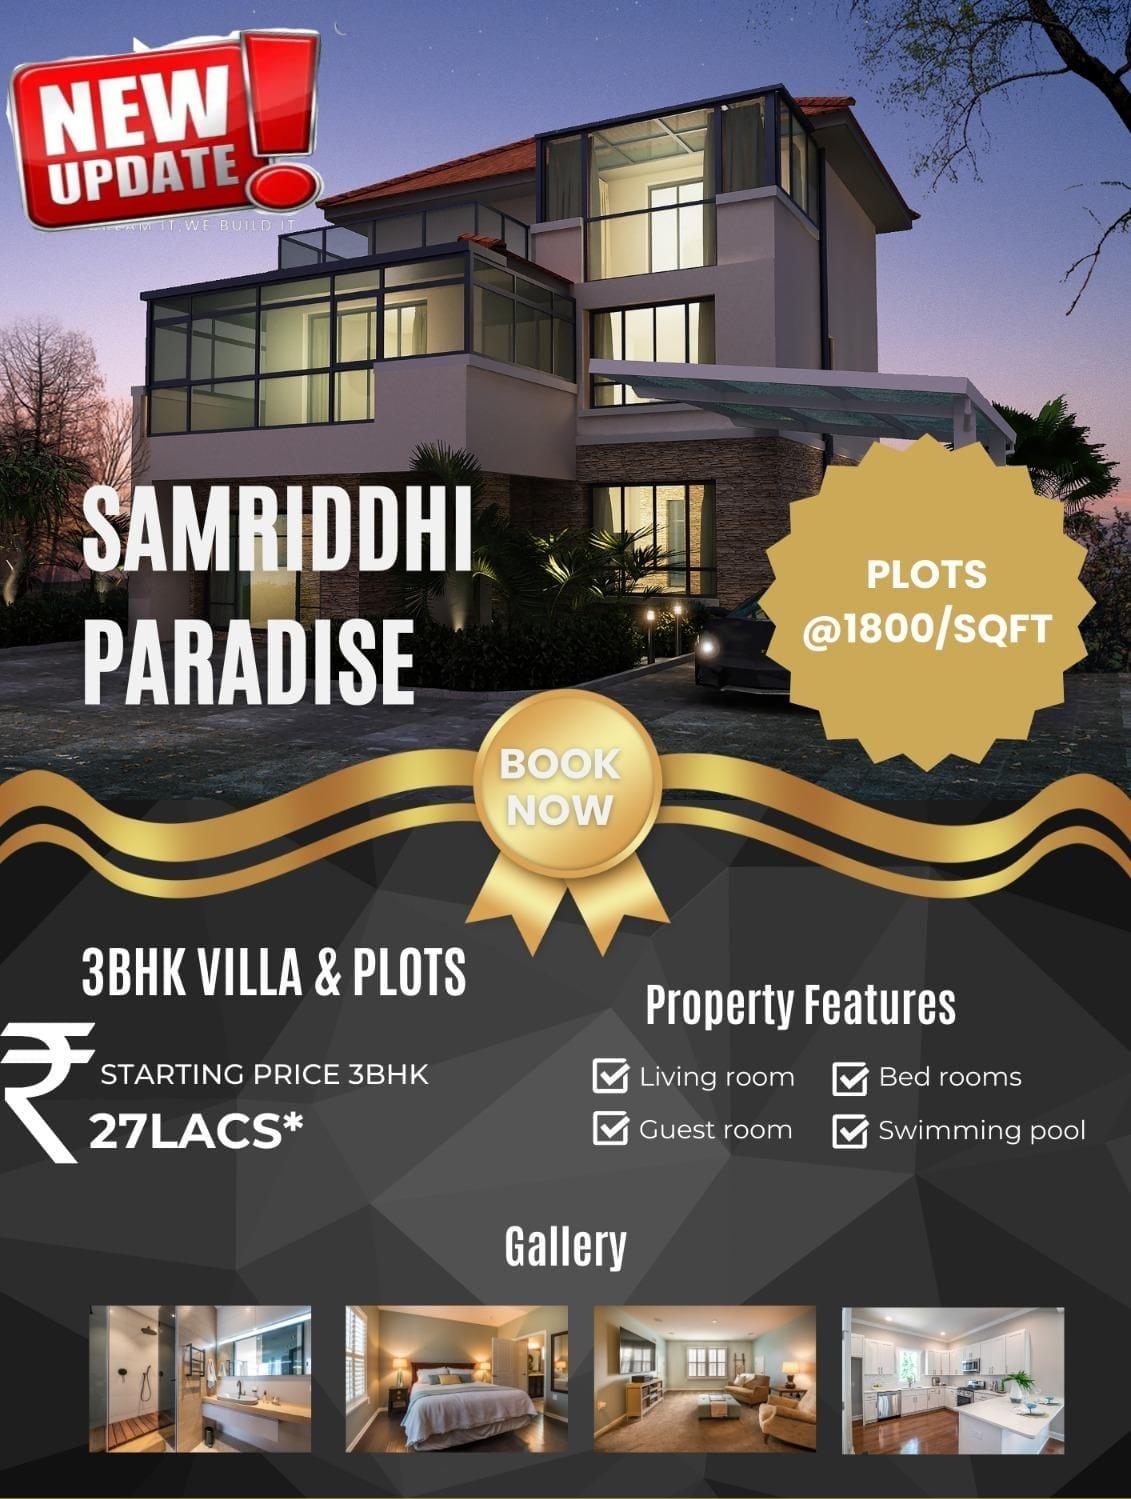 1,000 sq. ft. Sell Land/ Plot for sale @Near Jalsa Resort, outer ring road sultanpur road 